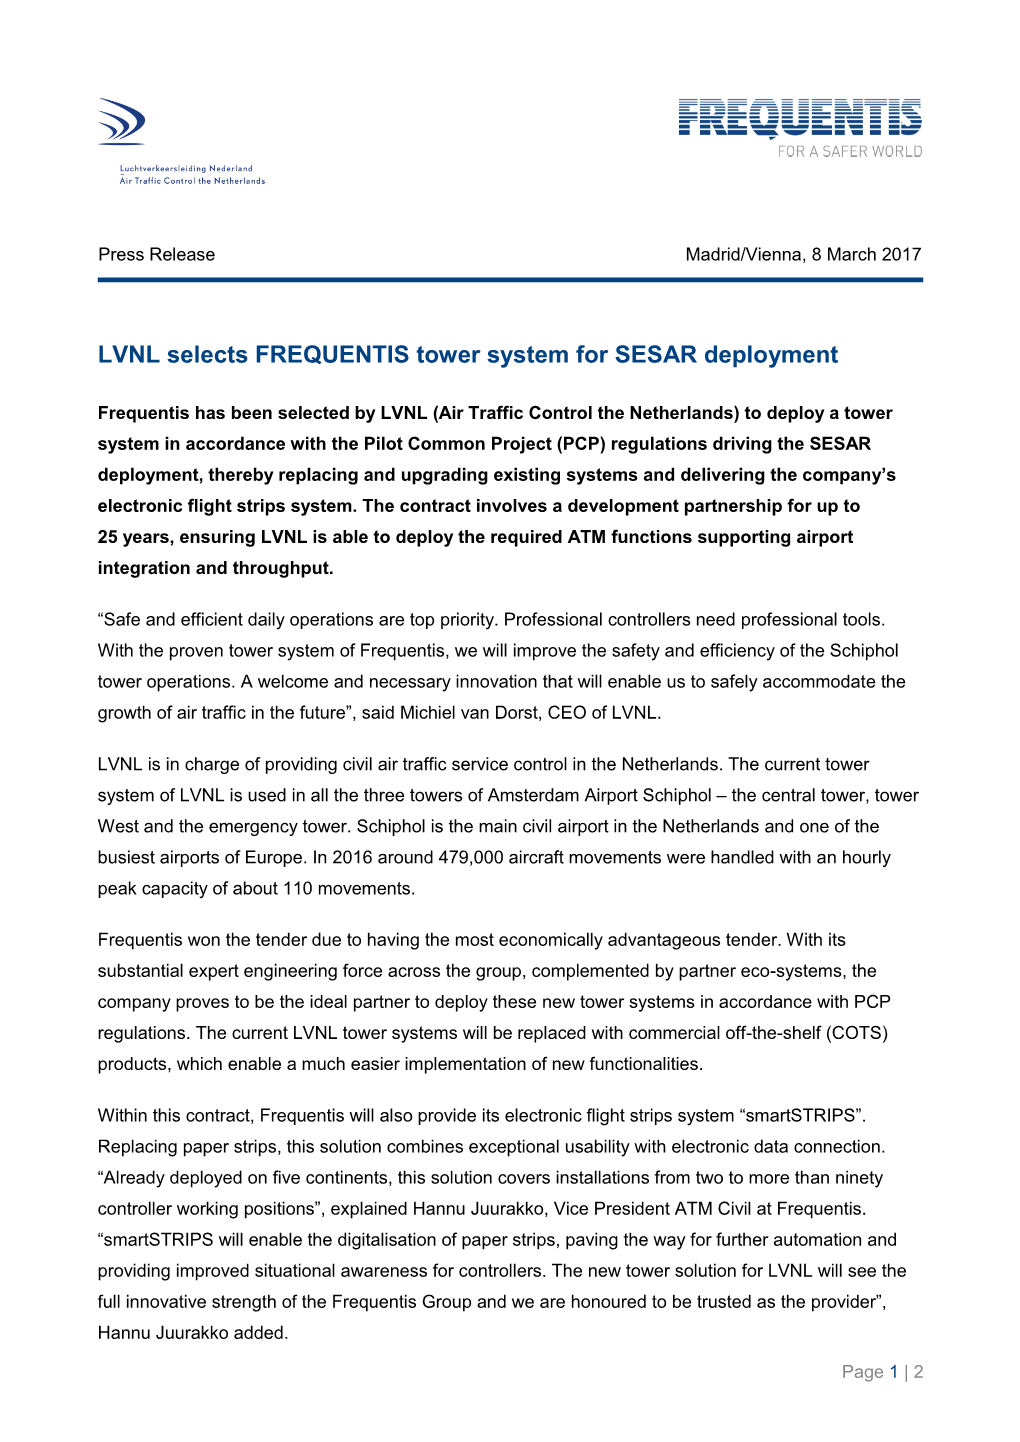 LVNL Selects FREQUENTIS Tower System for SESAR Deployment